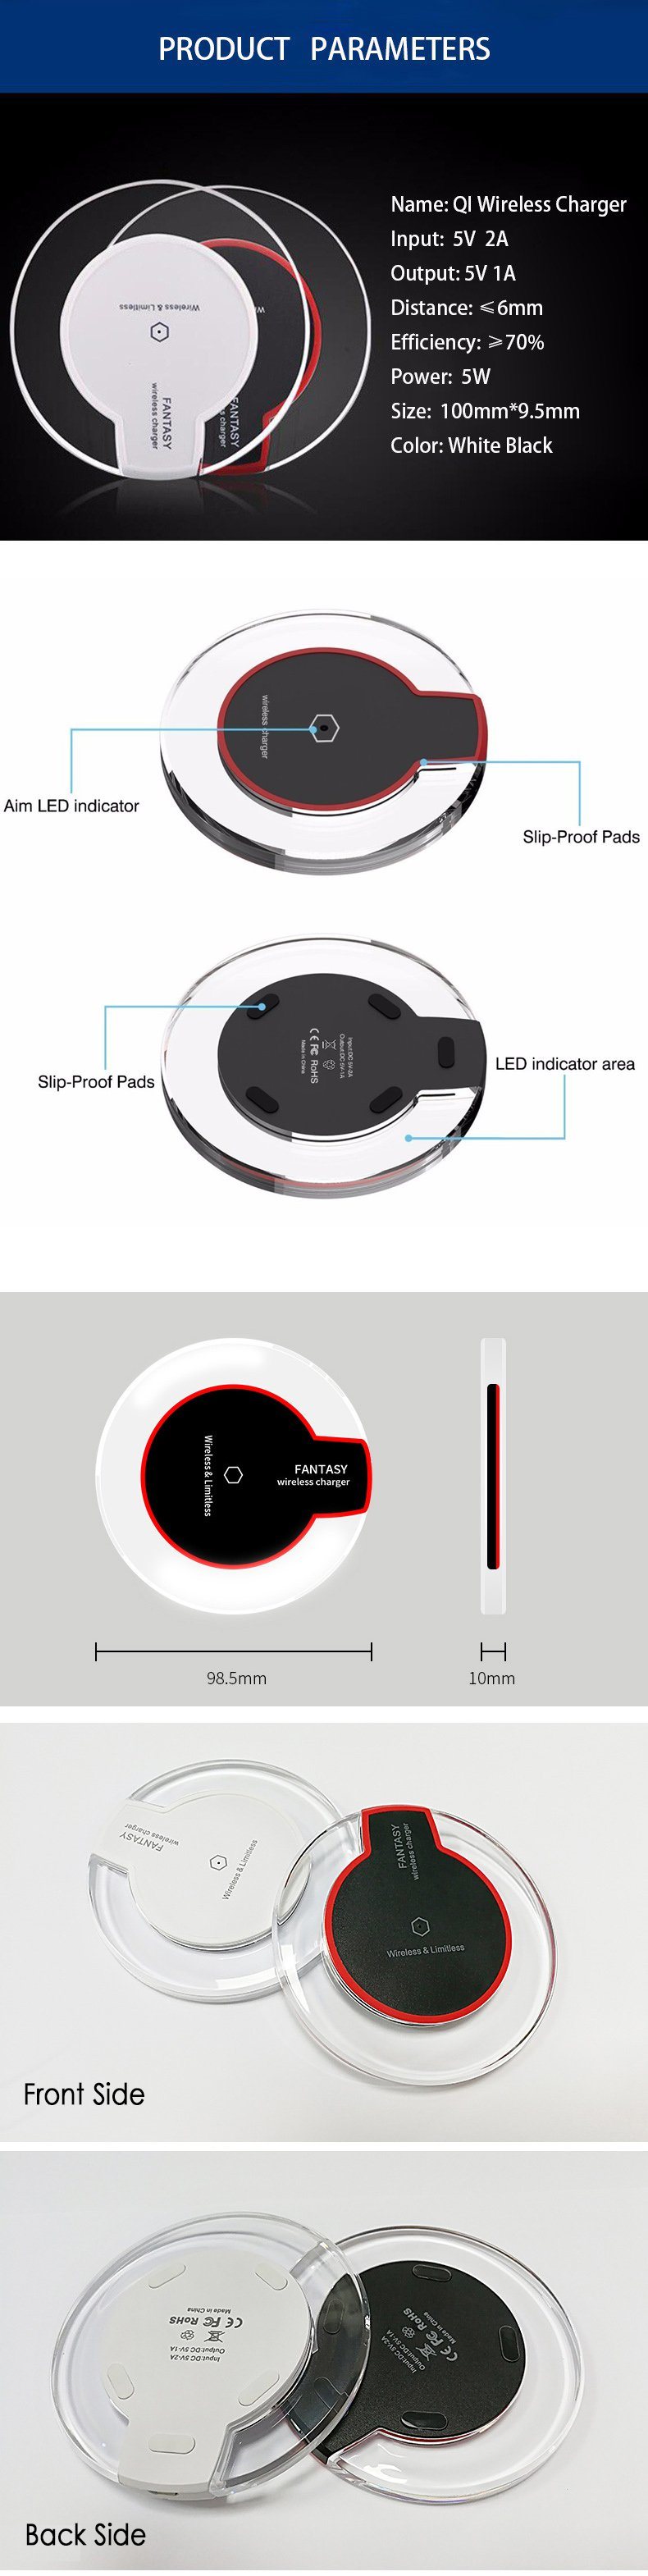 Universal Wireless Charger for Samsung S7 S8 for iPhone 8 Wireless Charger with Qi System